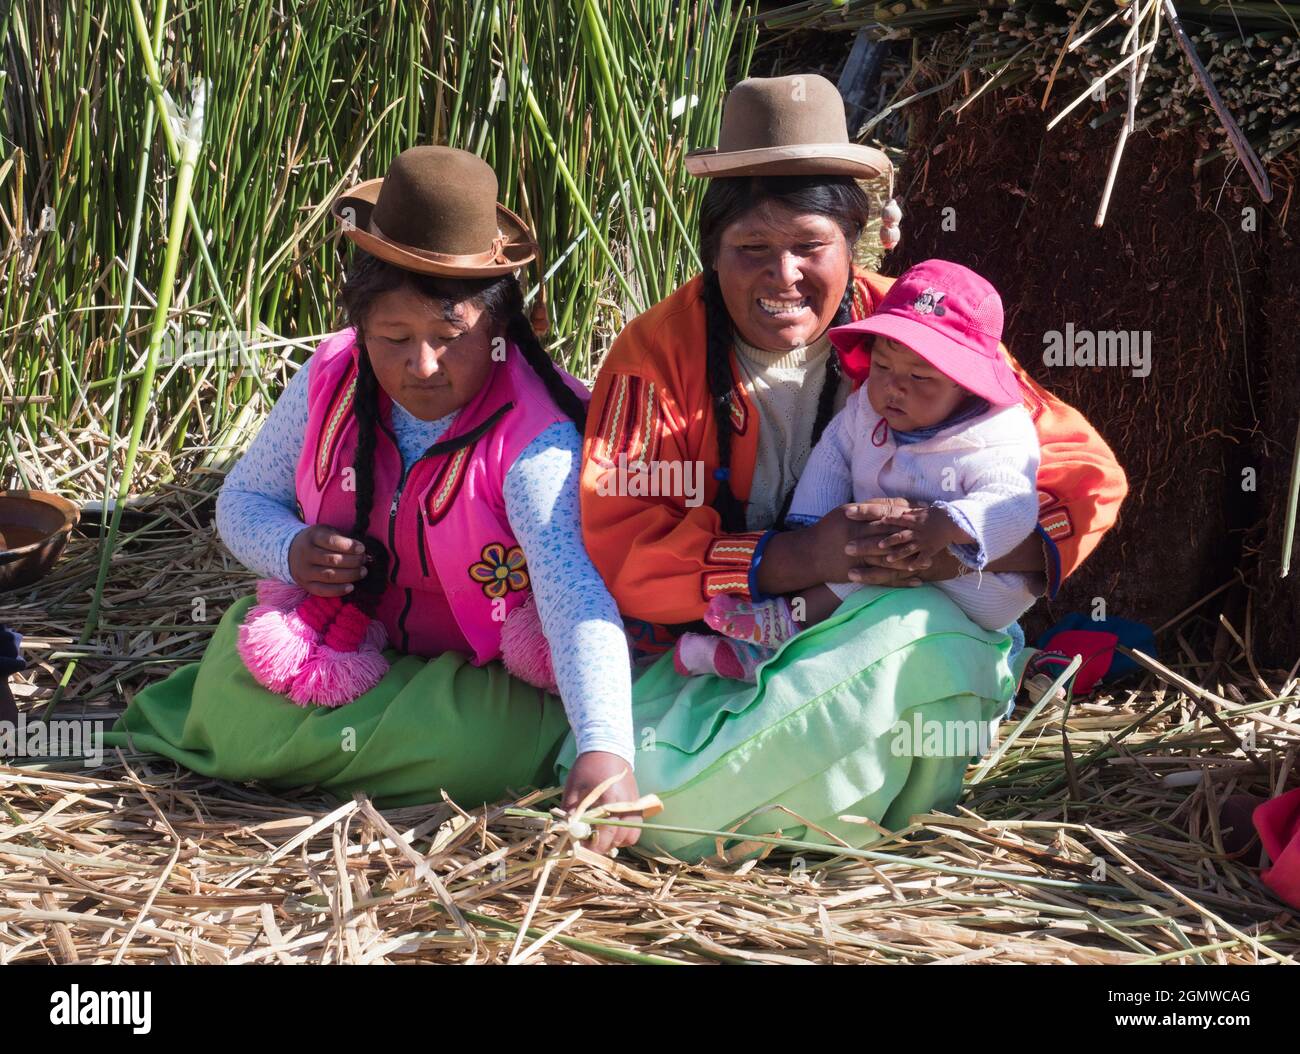 Lake Titicaca, Peru - 17 May 2018; three native people in shot   Situated at 3,812 metres (12,507 ft) elevation, the beautiful, jewel-like Lake Titica Stock Photo